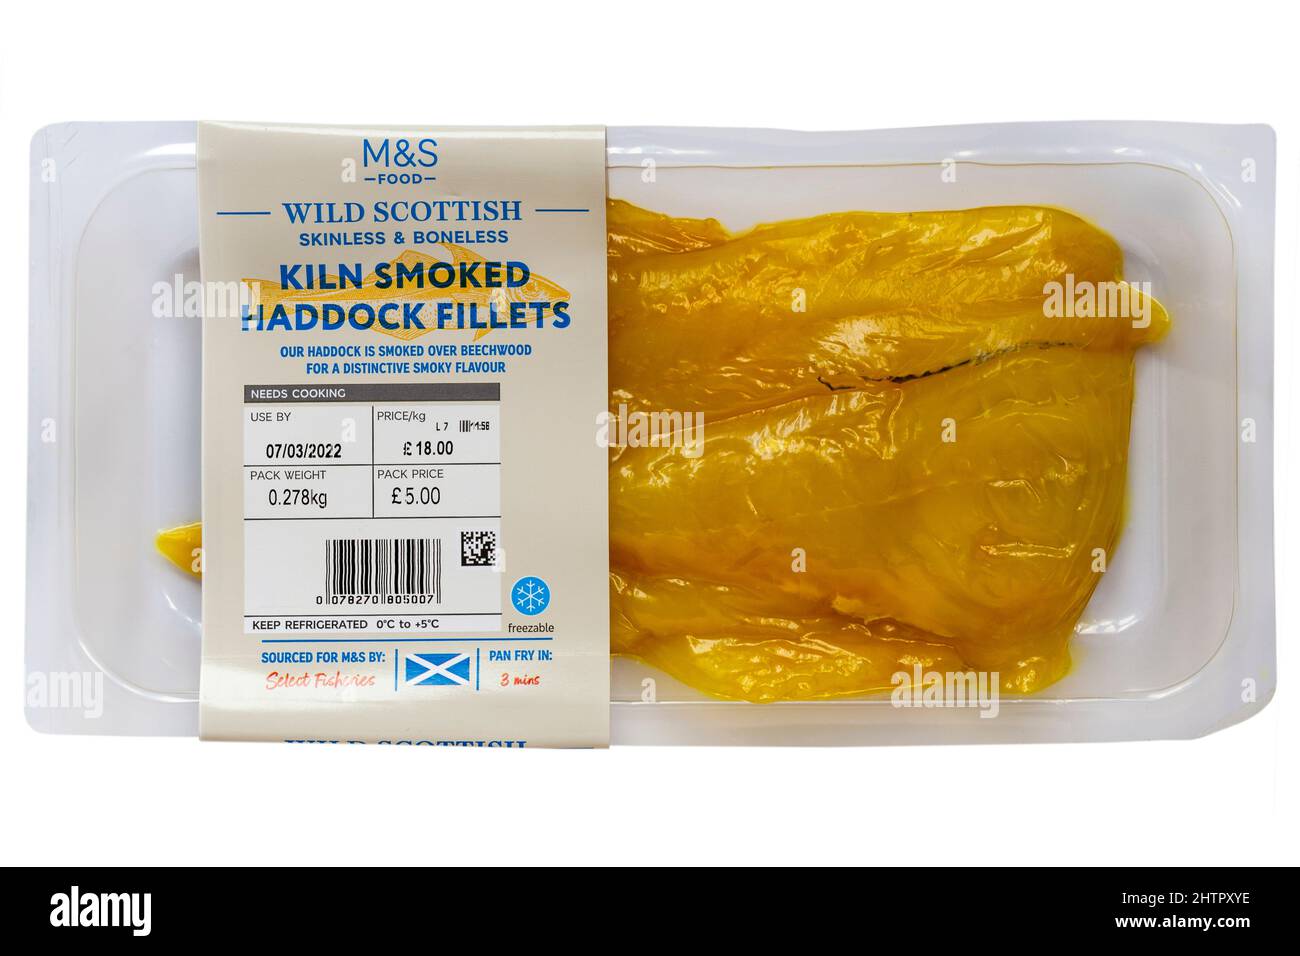 Pack of Wild Scottish Kiln smoked haddock fillets skinless & boneless from M&S isolated on white background Stock Photo